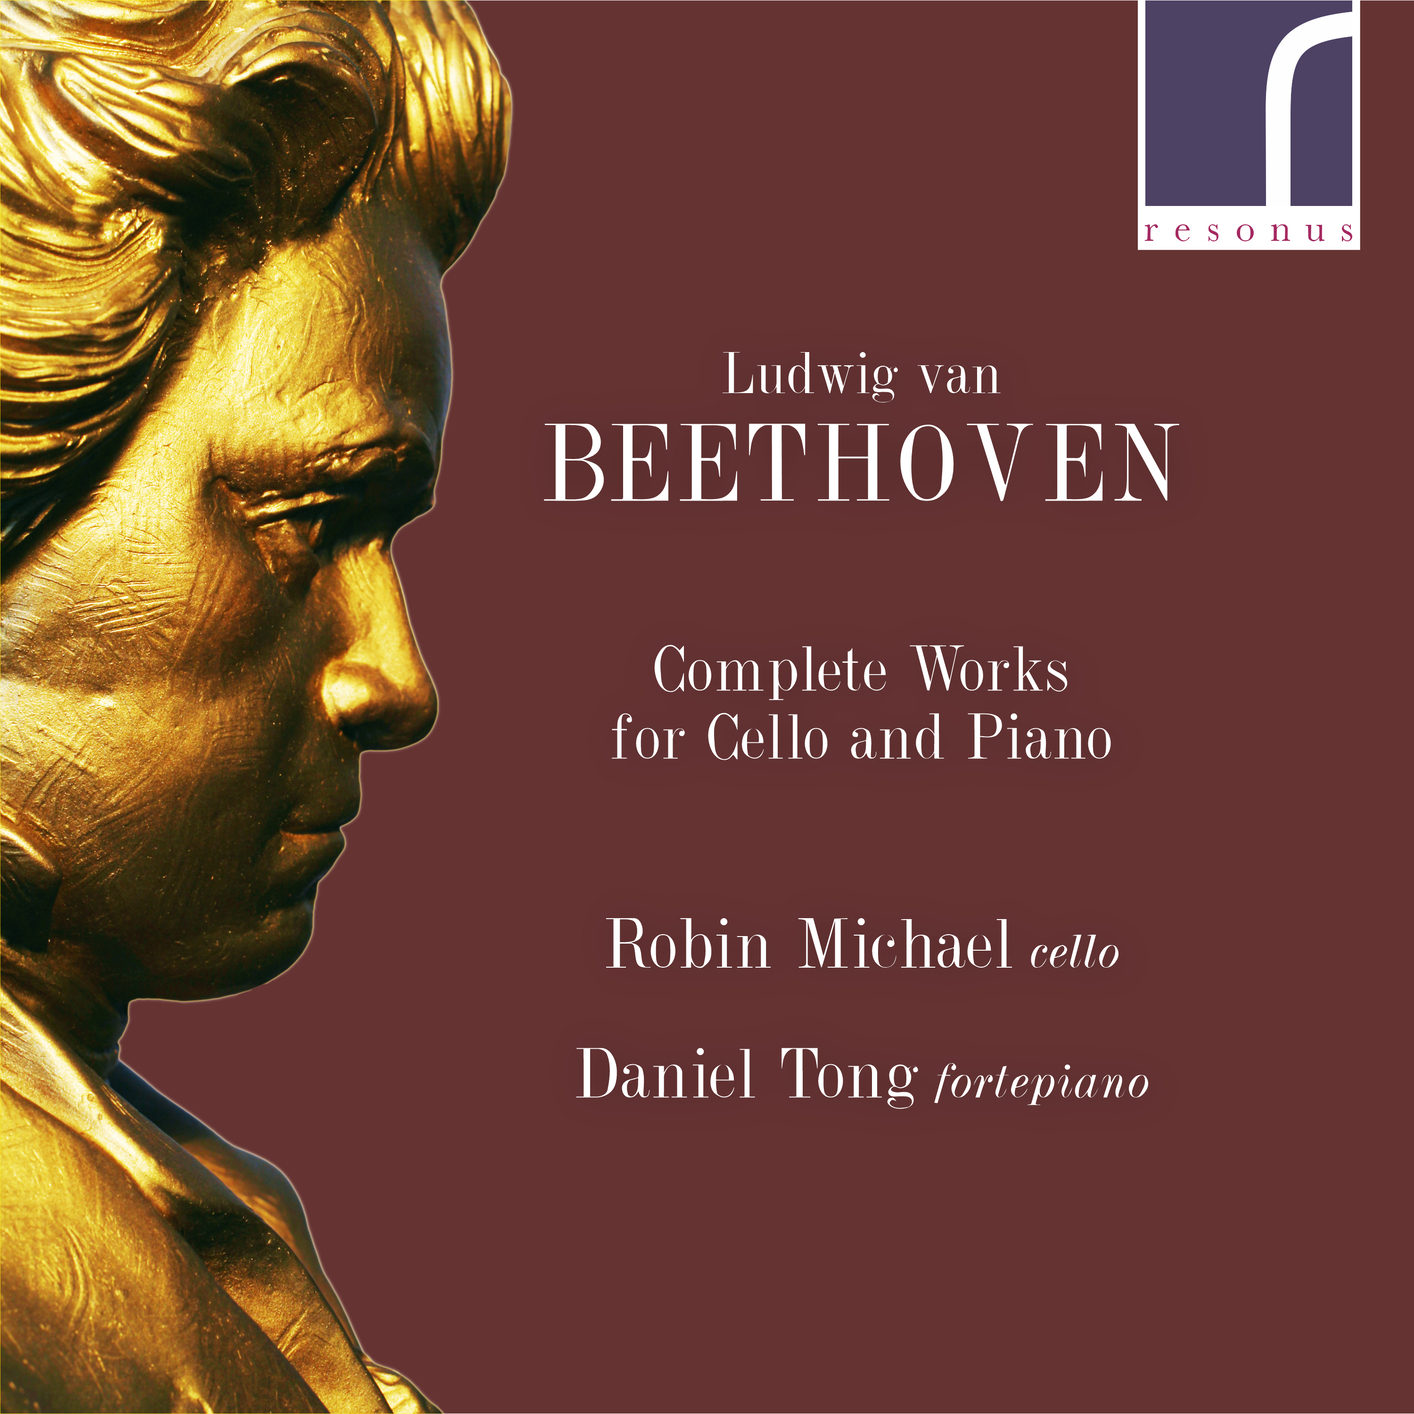 Daniel Tong & Robin Michael - Beethoven: Complete Works for Cello and Piano (2020) [FLAC 24bit/96kHz]